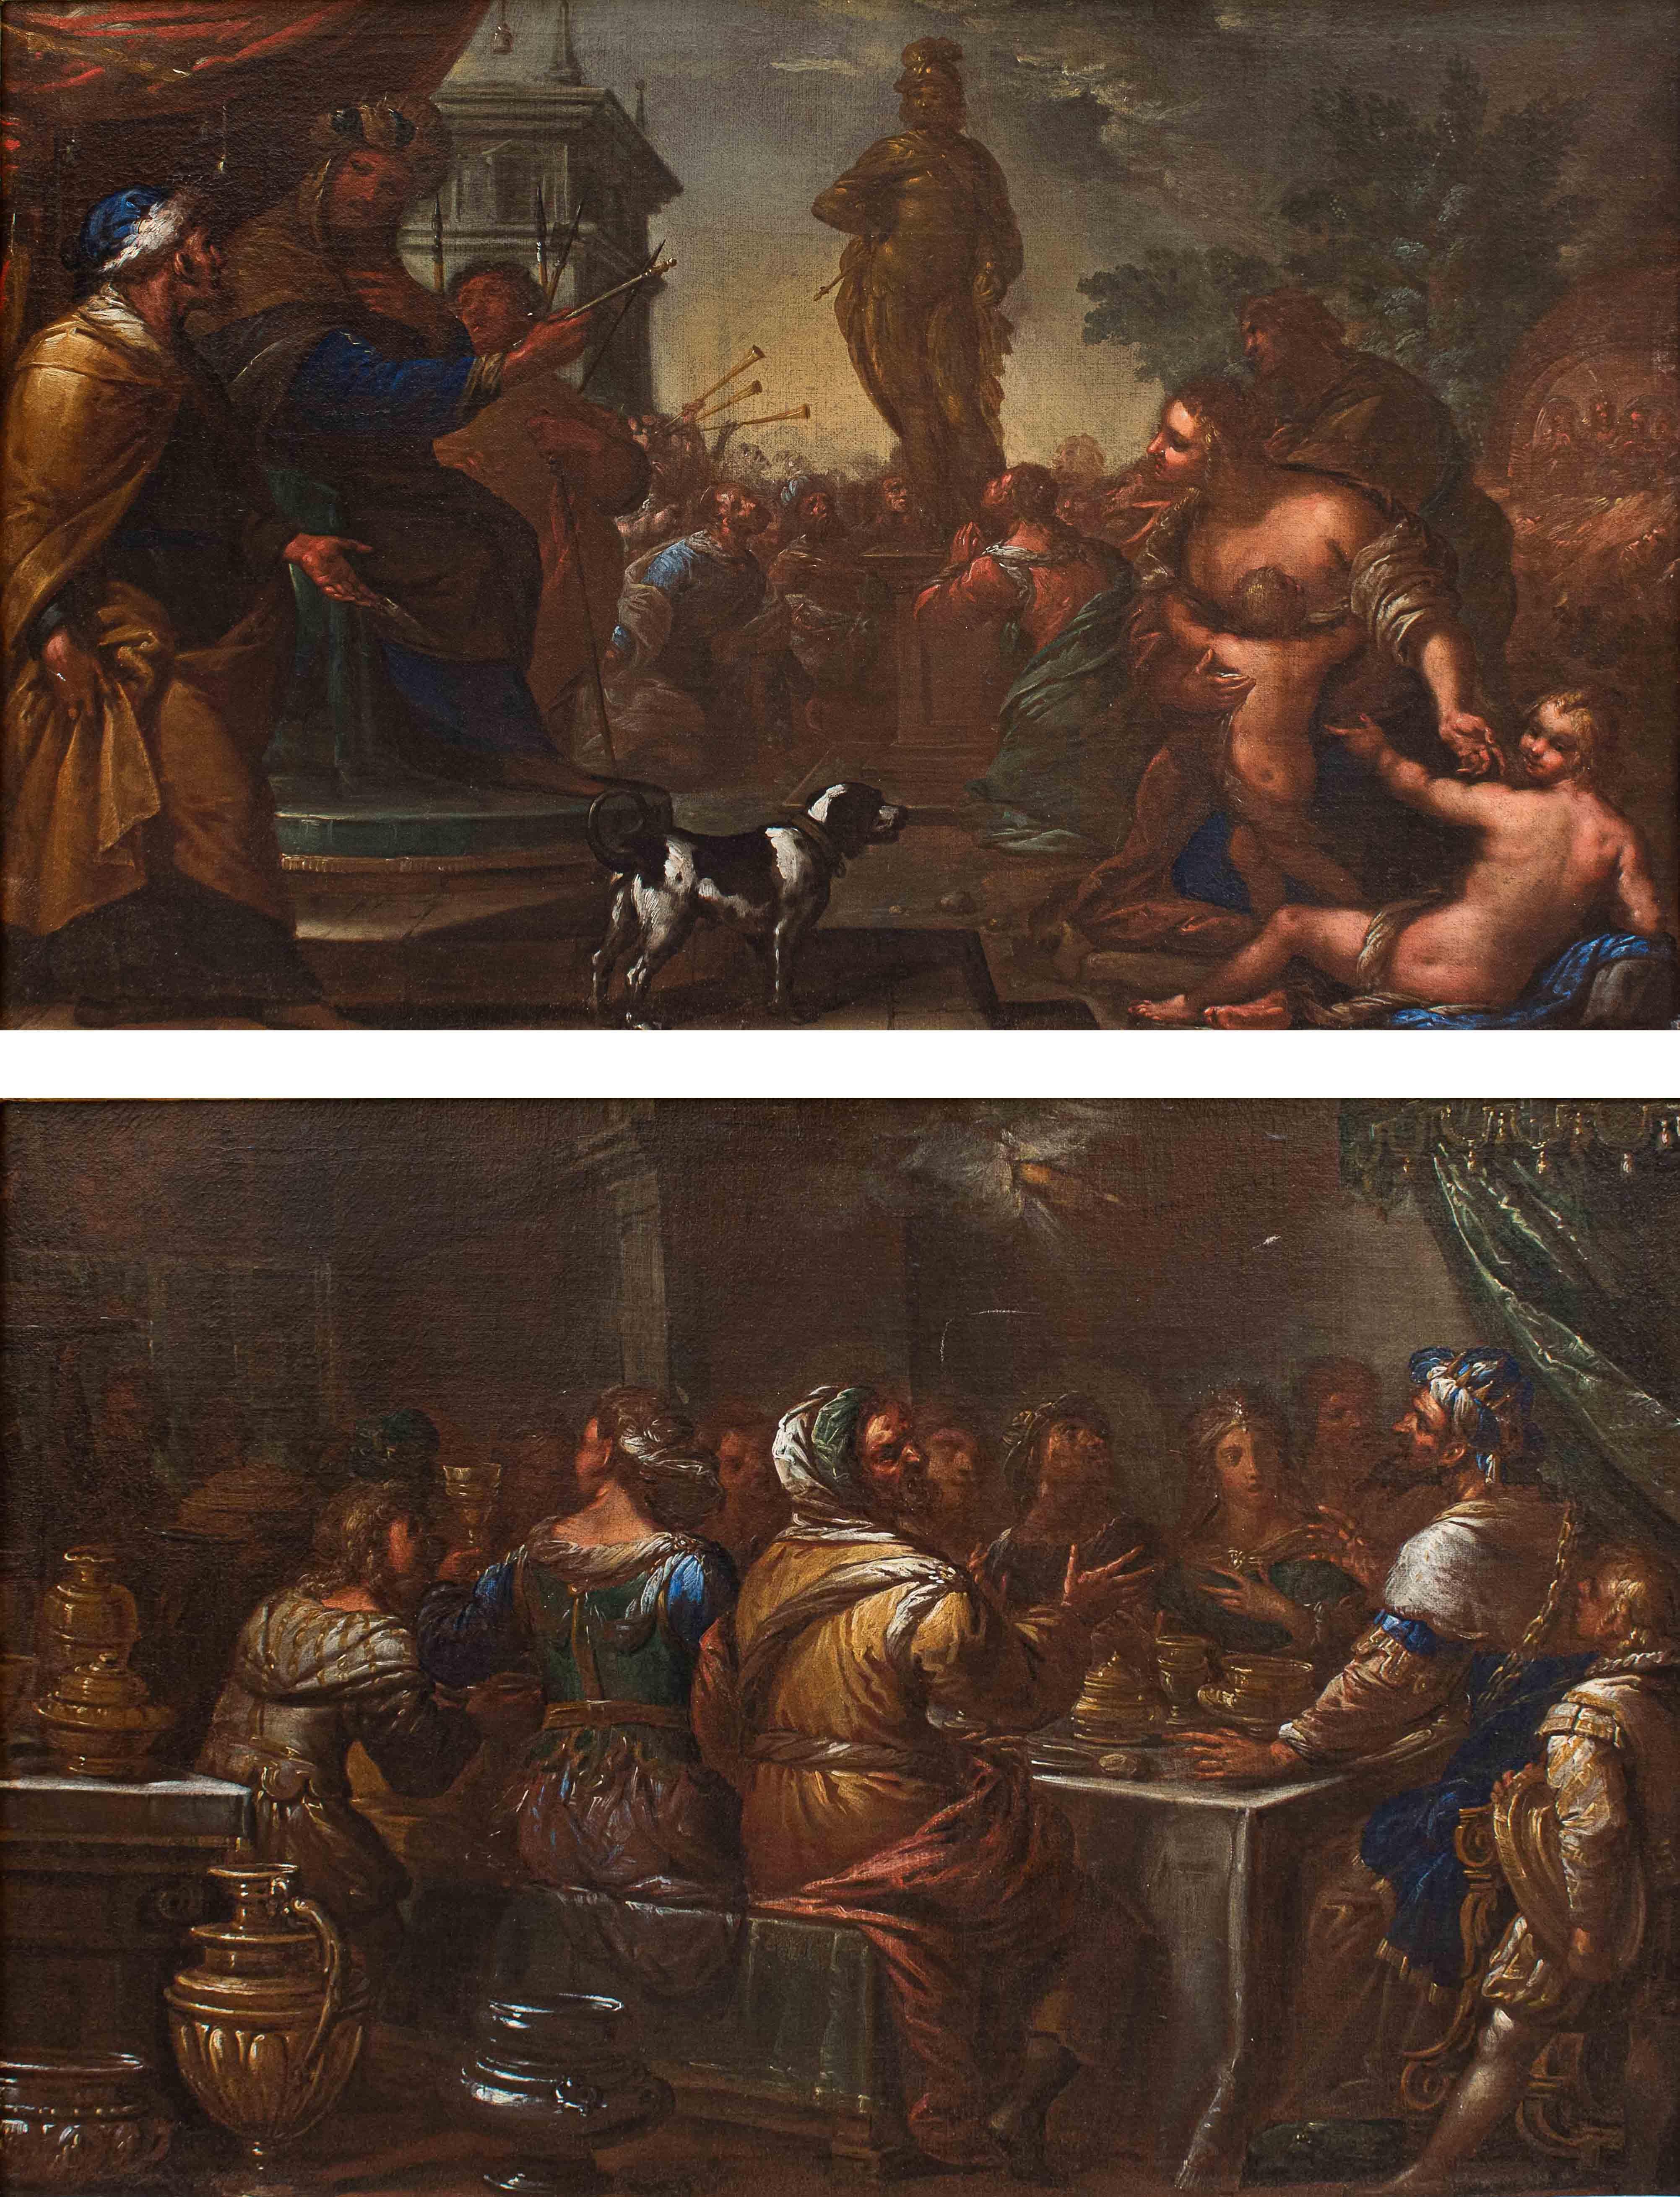 Ercole Procaccini the Younger (Milan 1605 - 1675)
Two Biblical episodes
Oil on canvas, 60 x 85 cm

The pair of paintings in question depict two biblical episodes. The first is identifiable with Belshazzar's Banquet: Belshazzar, king of Babylon,